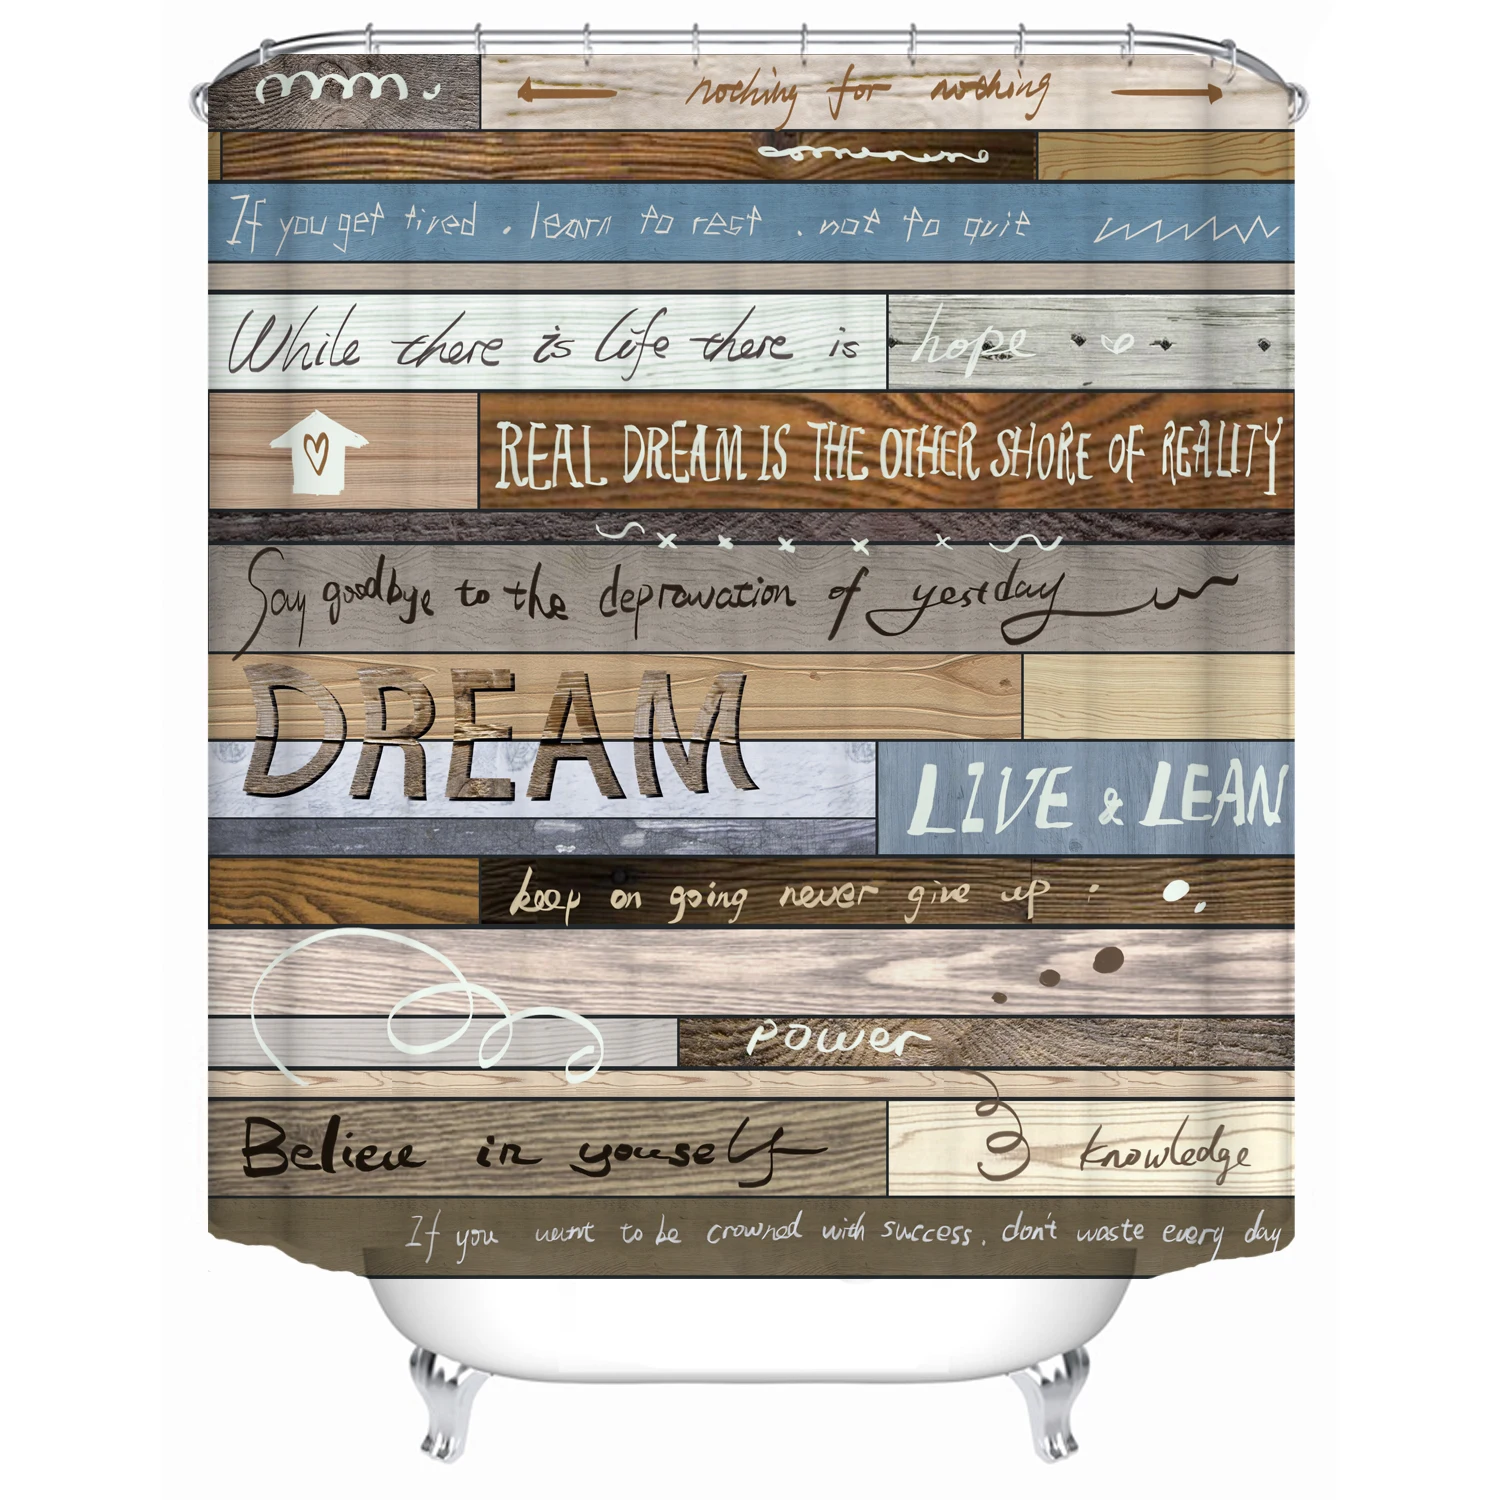 

Dream Quotes carved on old wooden boards Print Waterproof Fabric Shower Curtain Liner Covered Bathtub Bathroom Curtains 12 Hooks